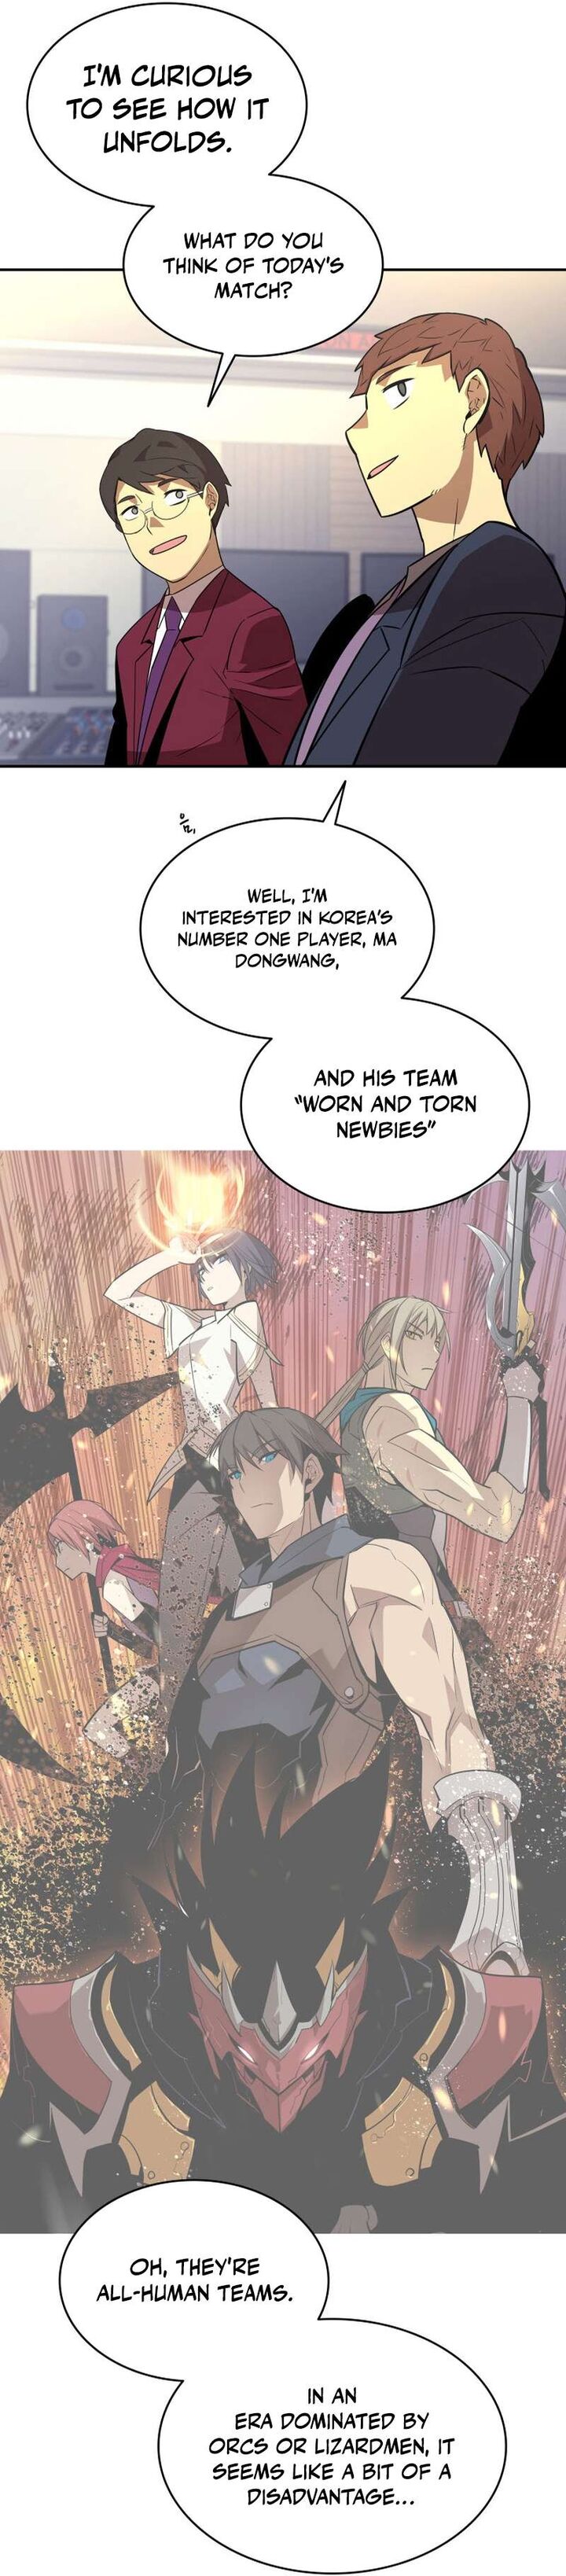 Worn And Torn Newbie Chapter 162 Page 9